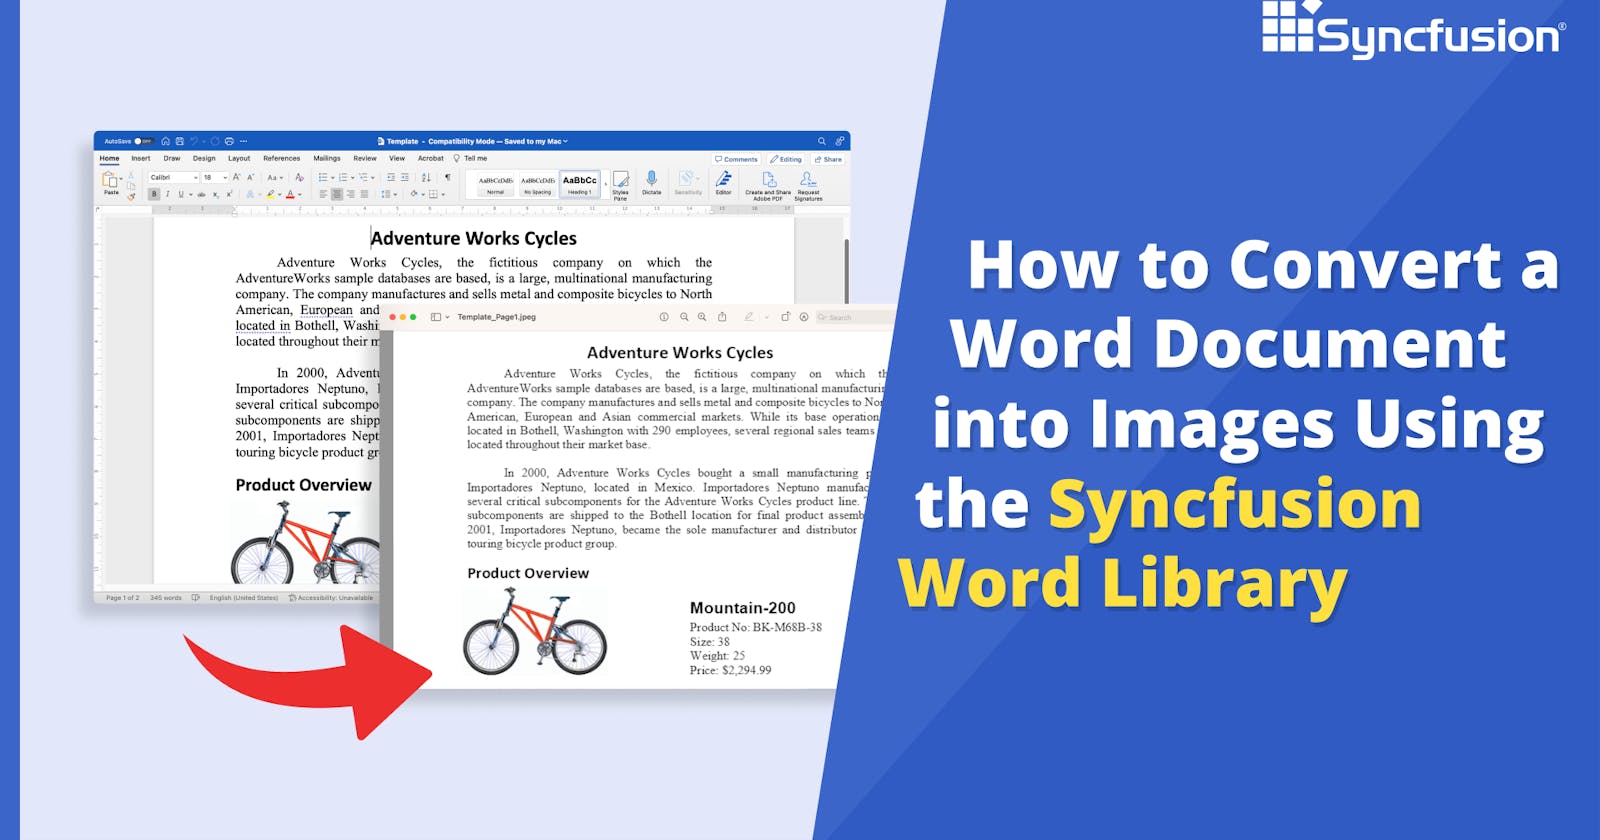 How to Convert a Word Document into Images Using the Syncfusion Word Library